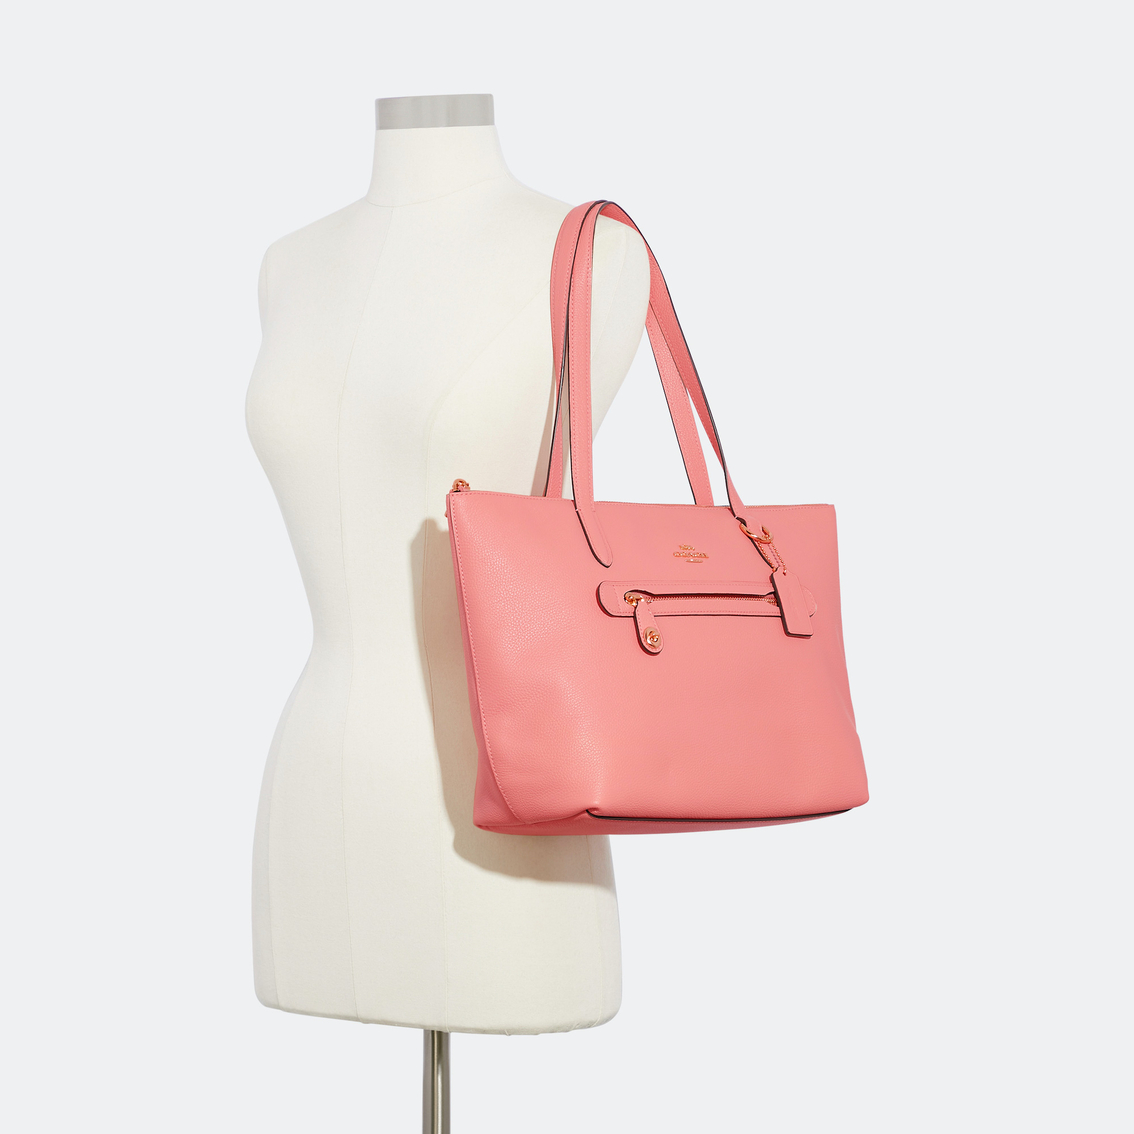 COACH Taylor Tote in Pebble Leather - Image 5 of 6